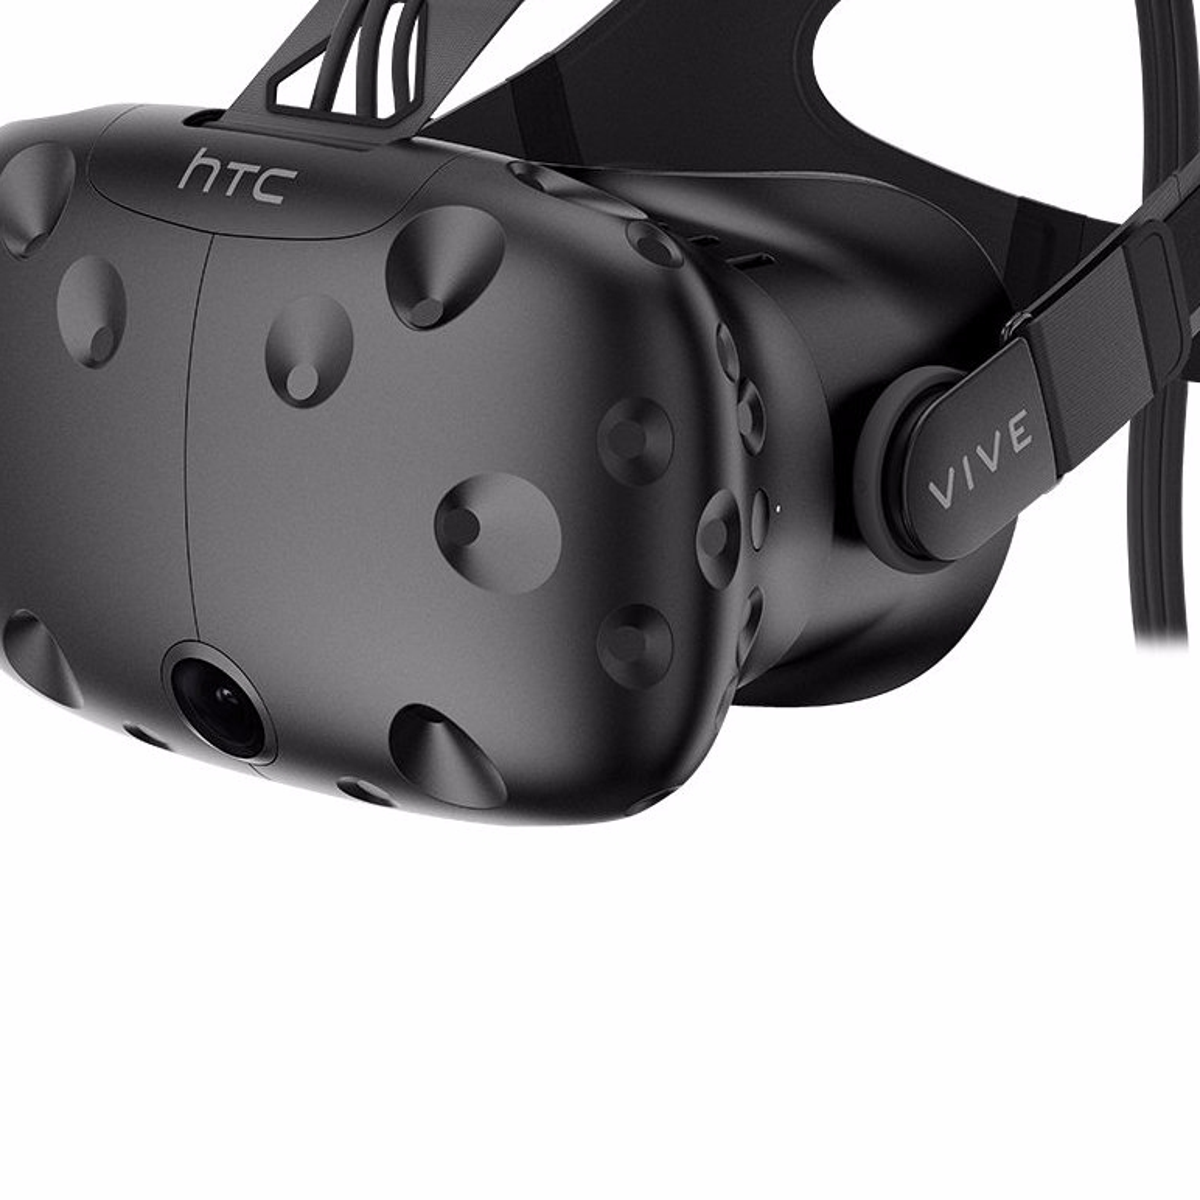 Turning On Your Vive Headset: A Quick Guide